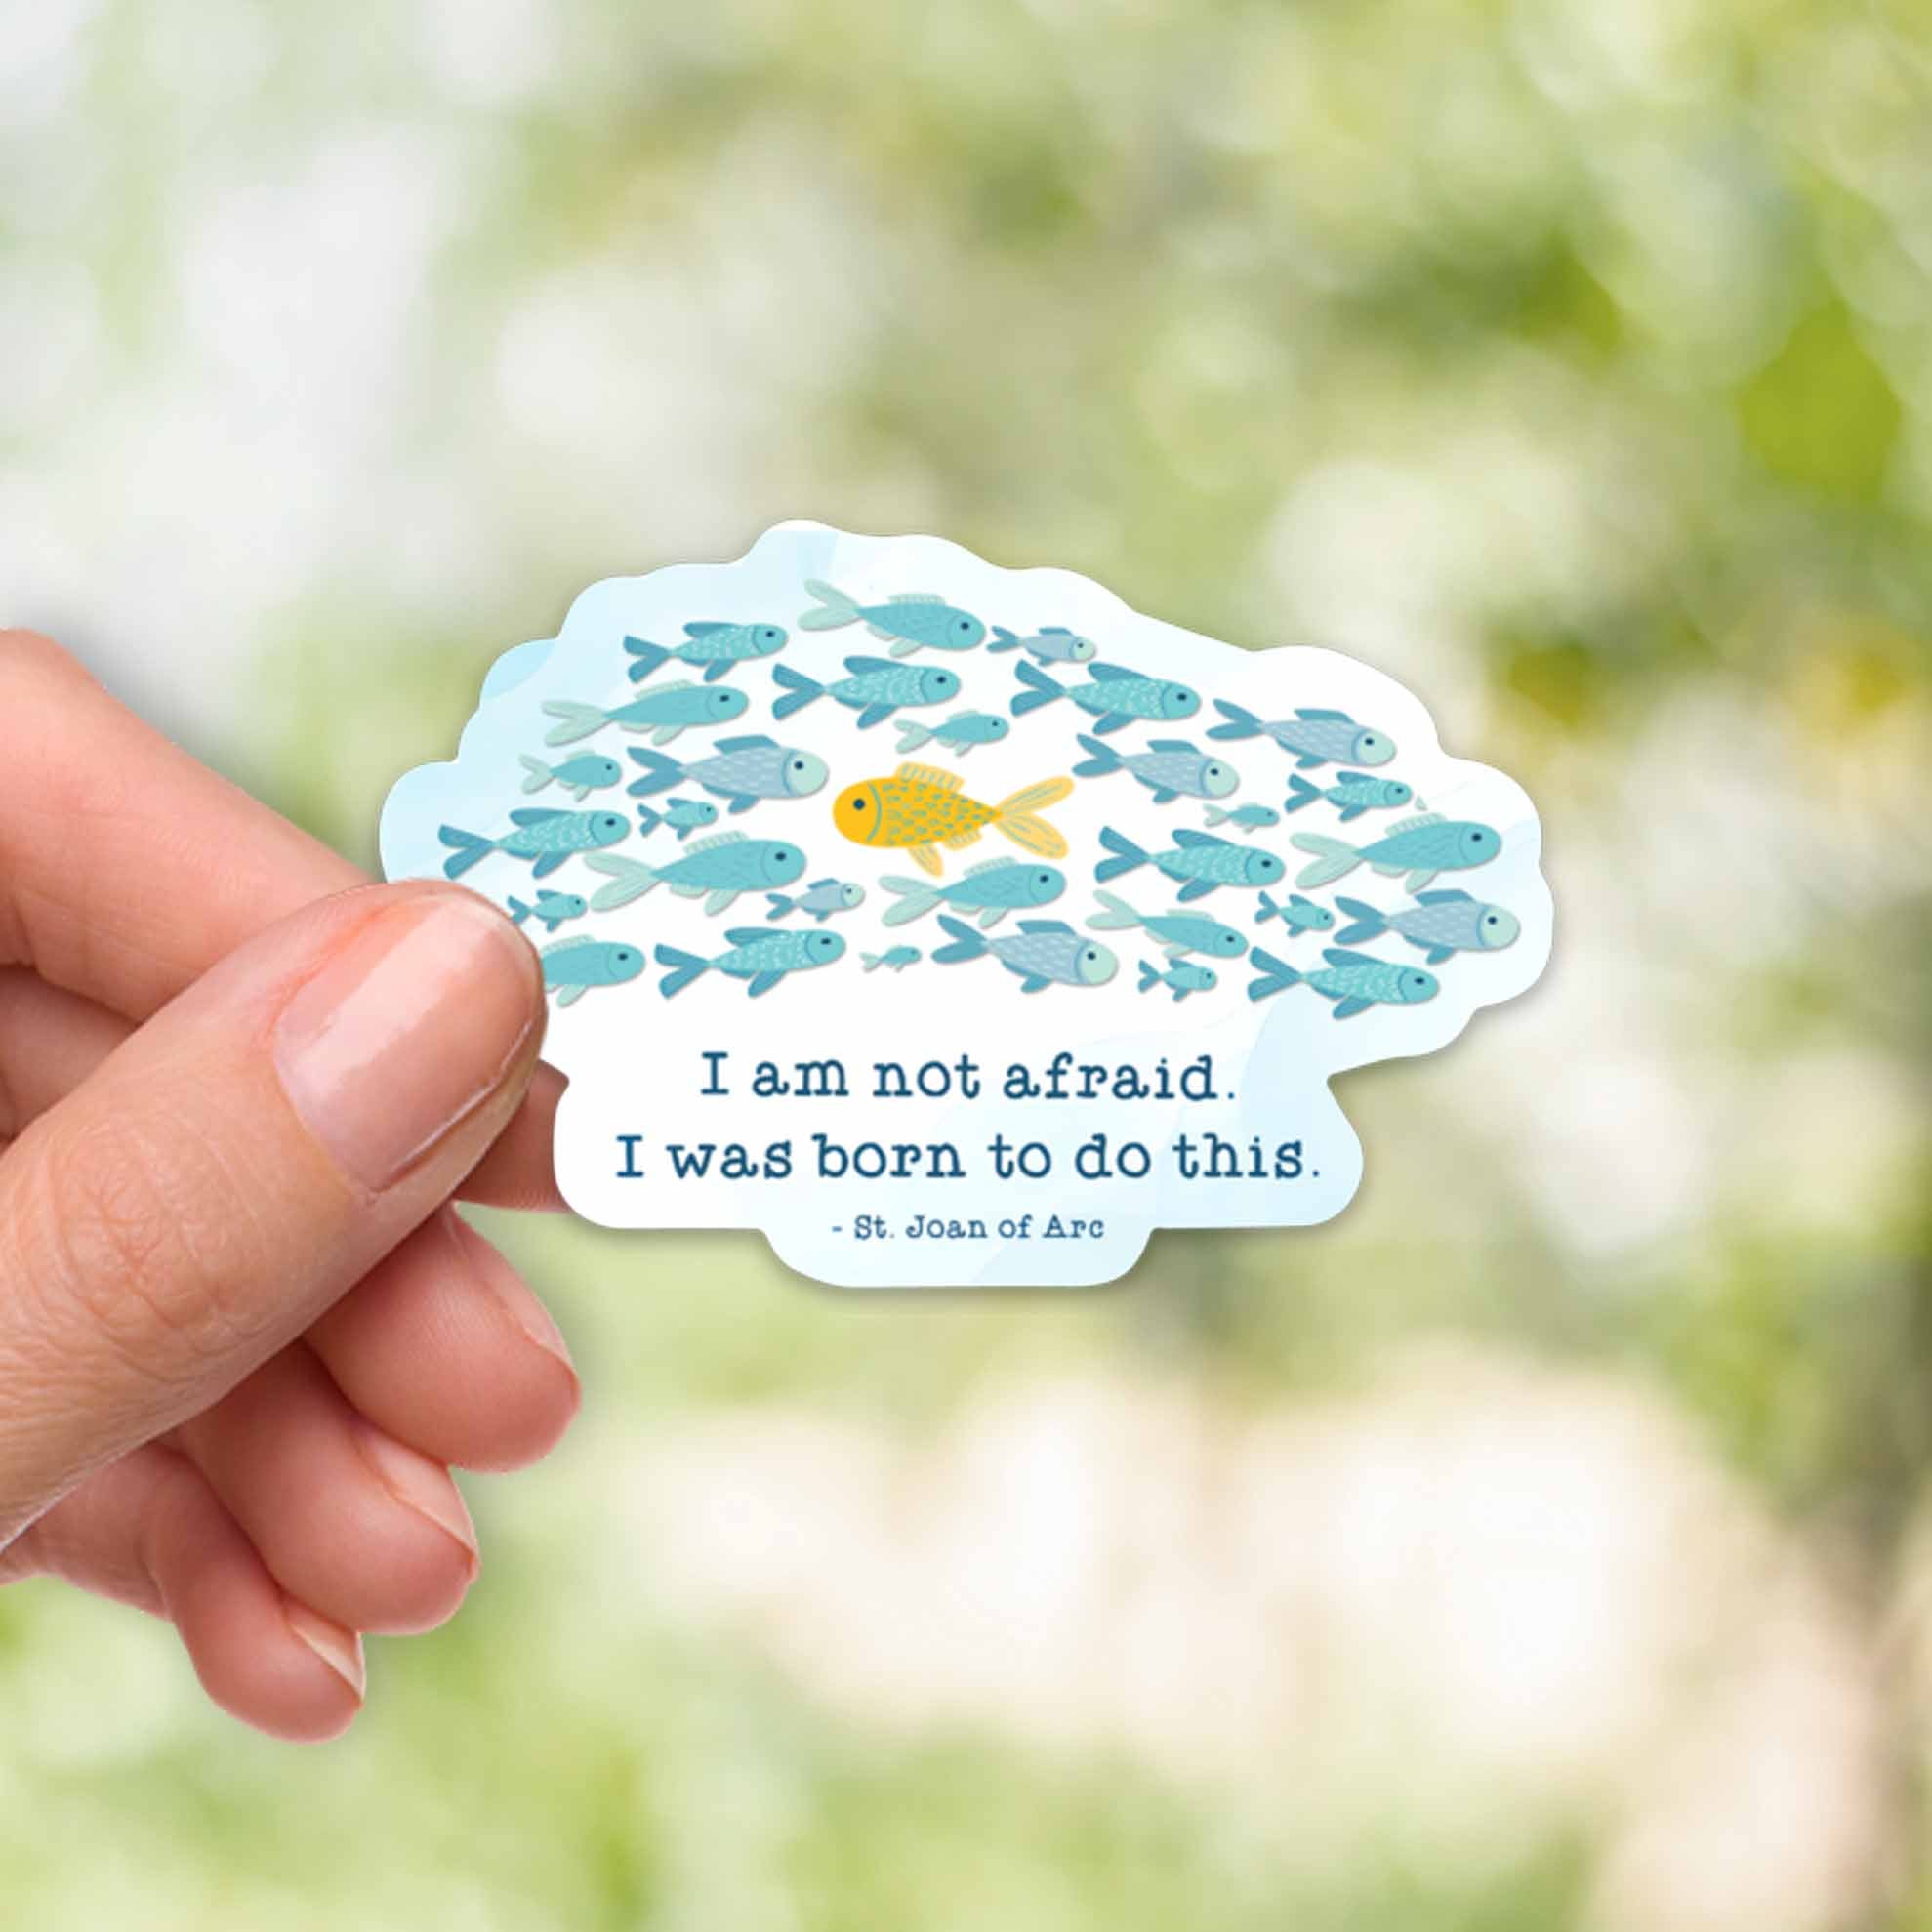 St Joan of Arc "I was born to do this" Vinyl Waterproof Sticker